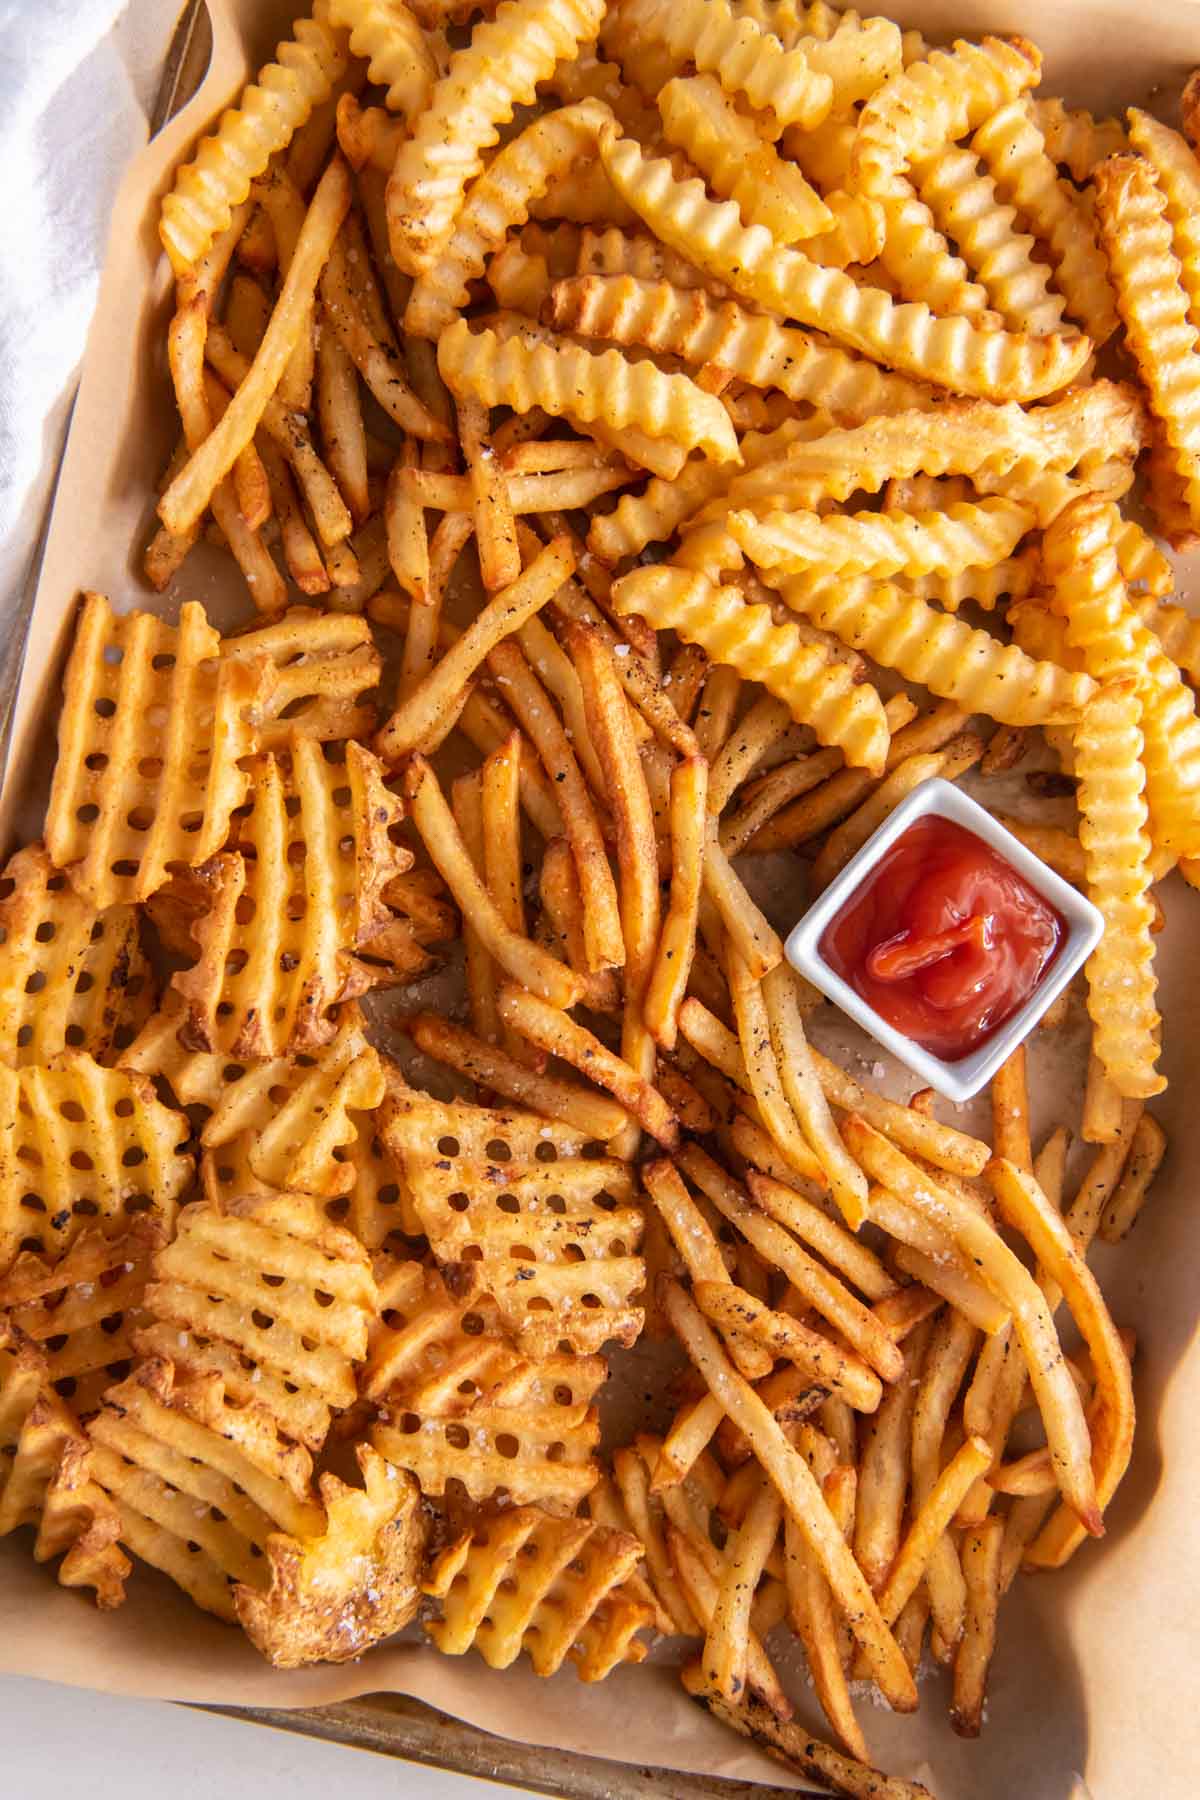 Shoestring, crinkle cut and waffle cut fries served with small dish of ketchup.